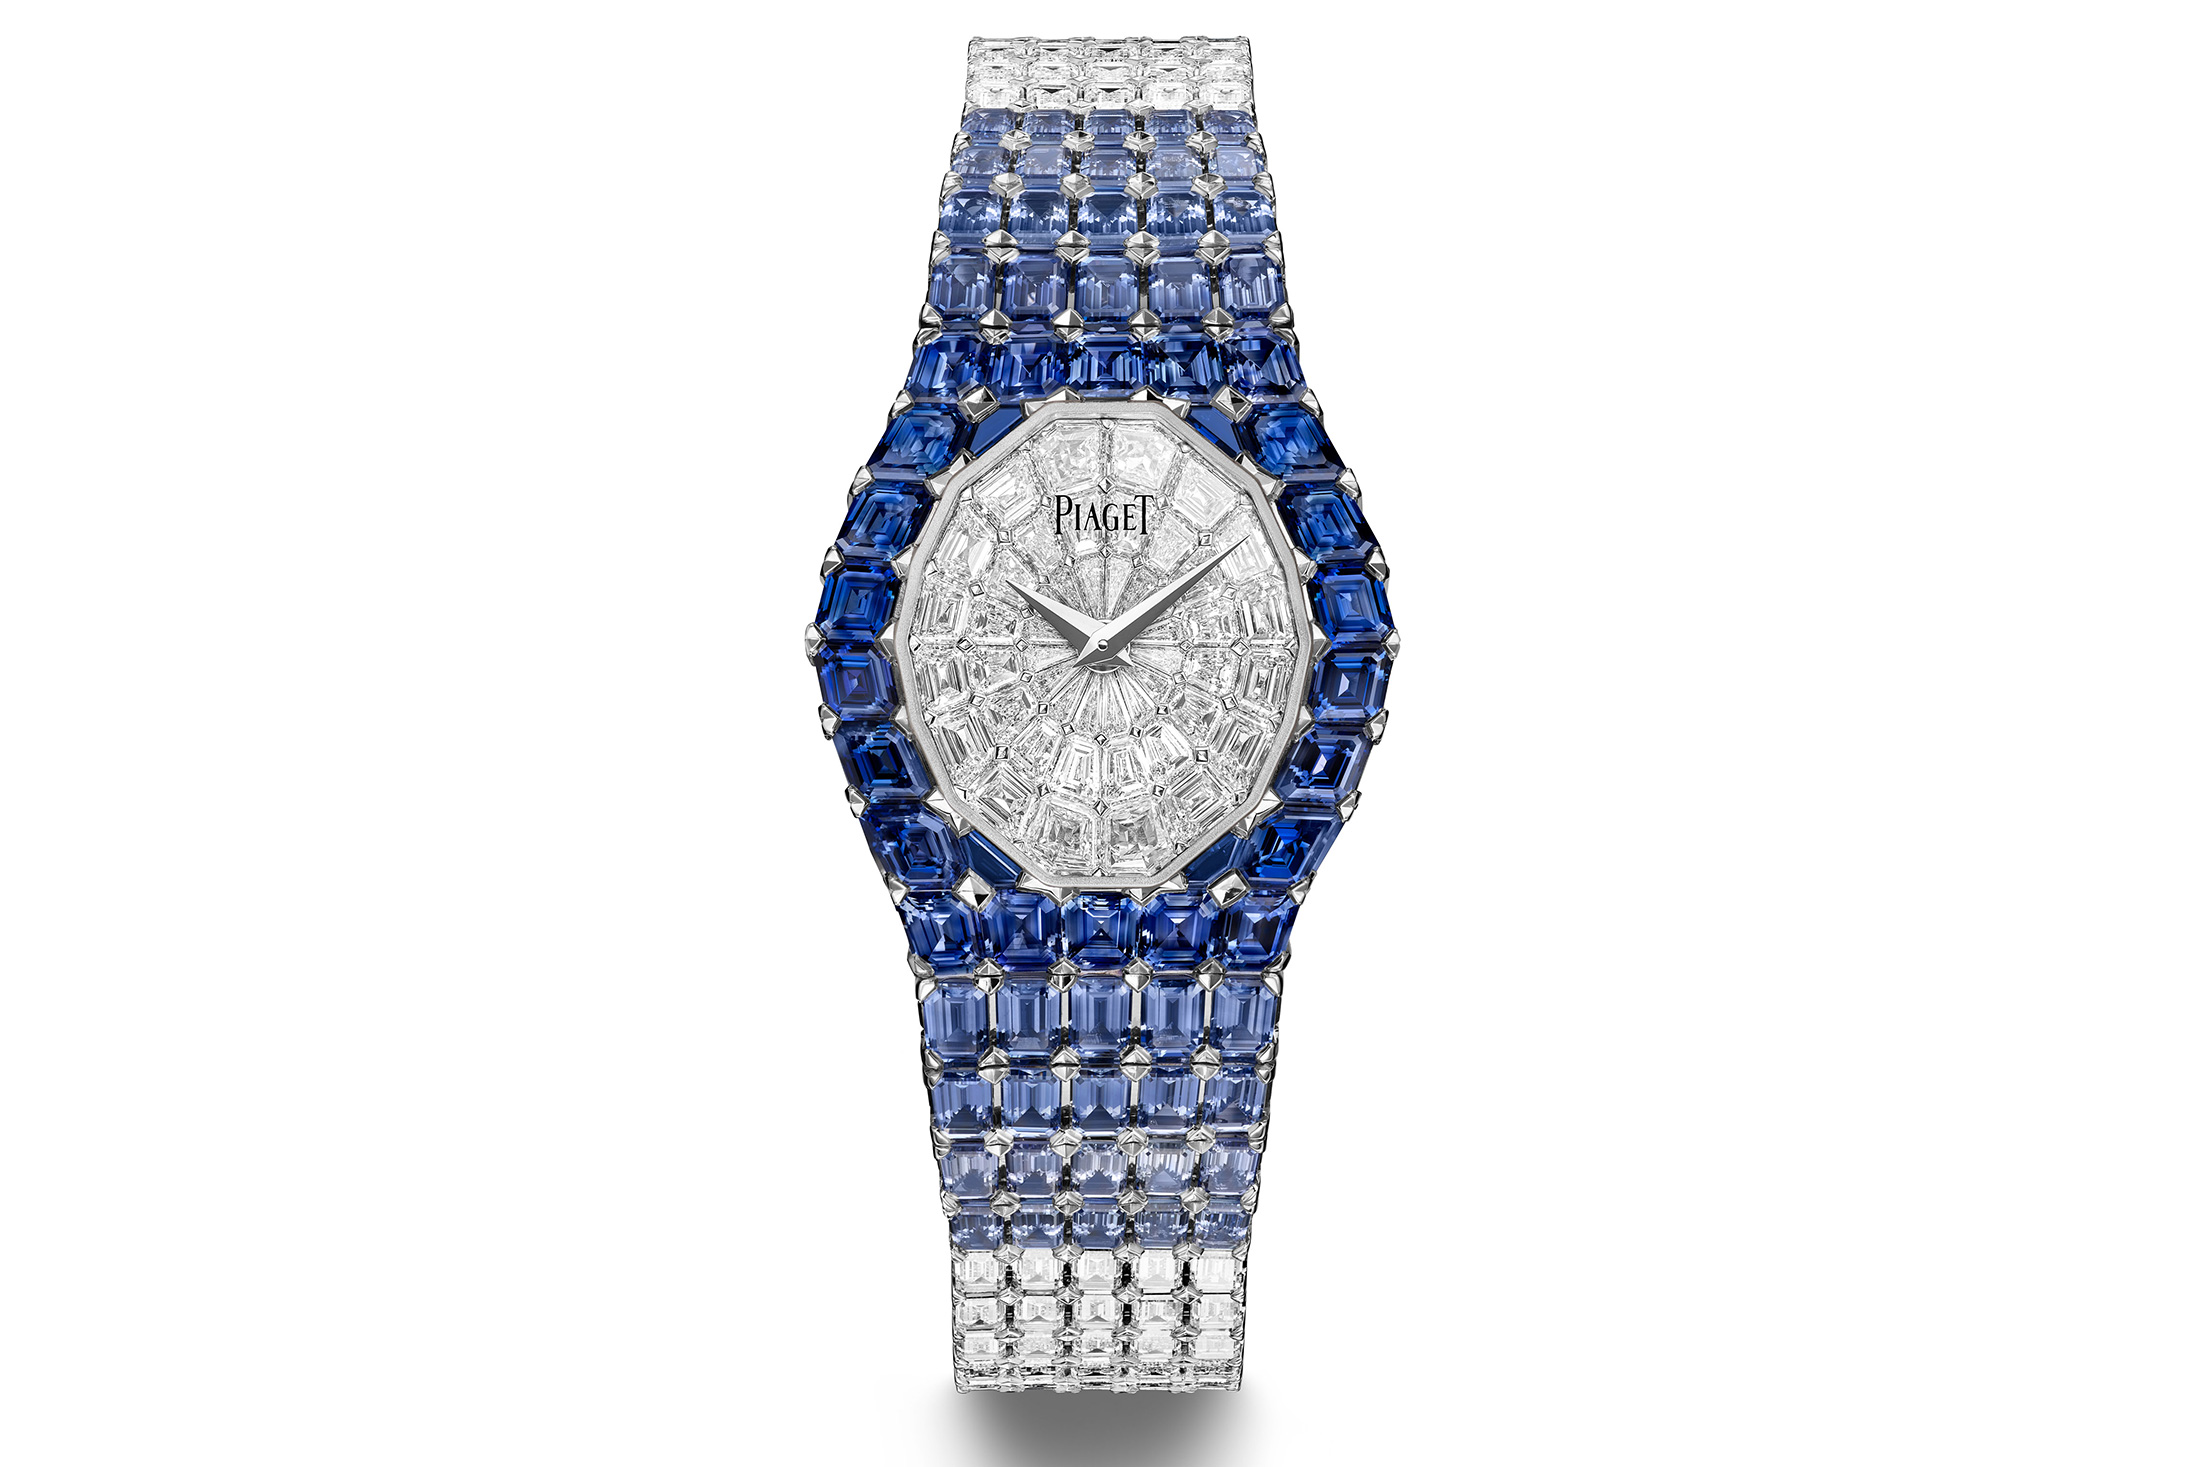 Stand Out Get Noticed! Big Face Ladies Bejeweled Rubber Iced Out Colorful  Watch with Genuine Rhinestone Diamond Accents - Touch of Female Celebrity  Glamour - ST10385T Royal Blue Tennis - Walmart.com